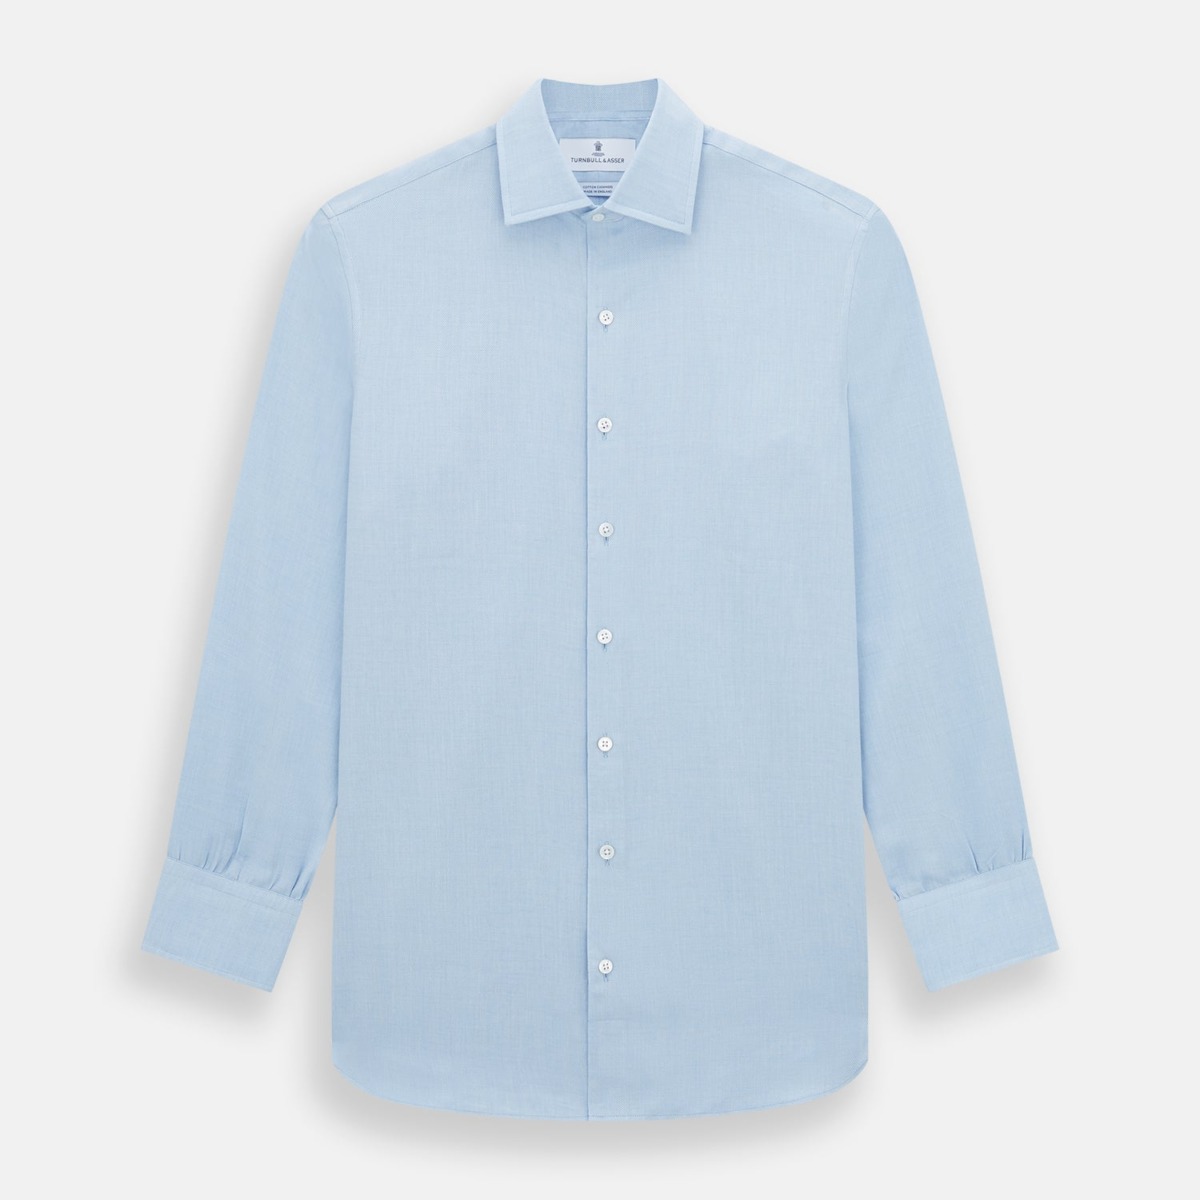 Gents Shirt in Blue Turnbull & Asser - Turnbull And Asser GOOFASH